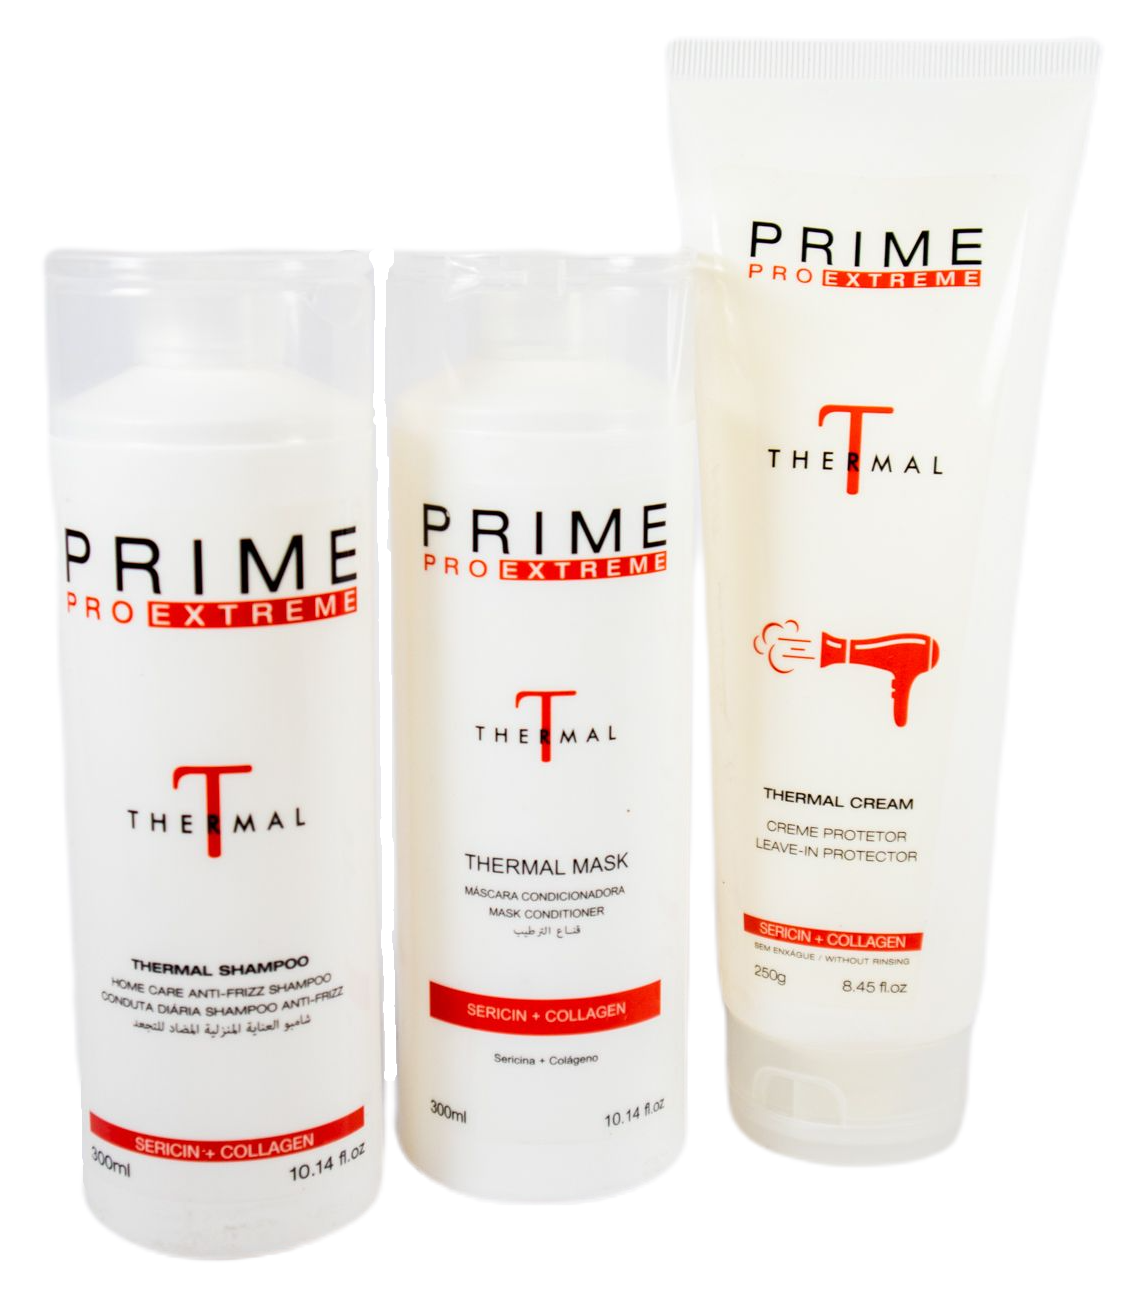 Prime Pro Extreme Home Care Professional Thermal Home Care Kit 3 Products - Prime Pro